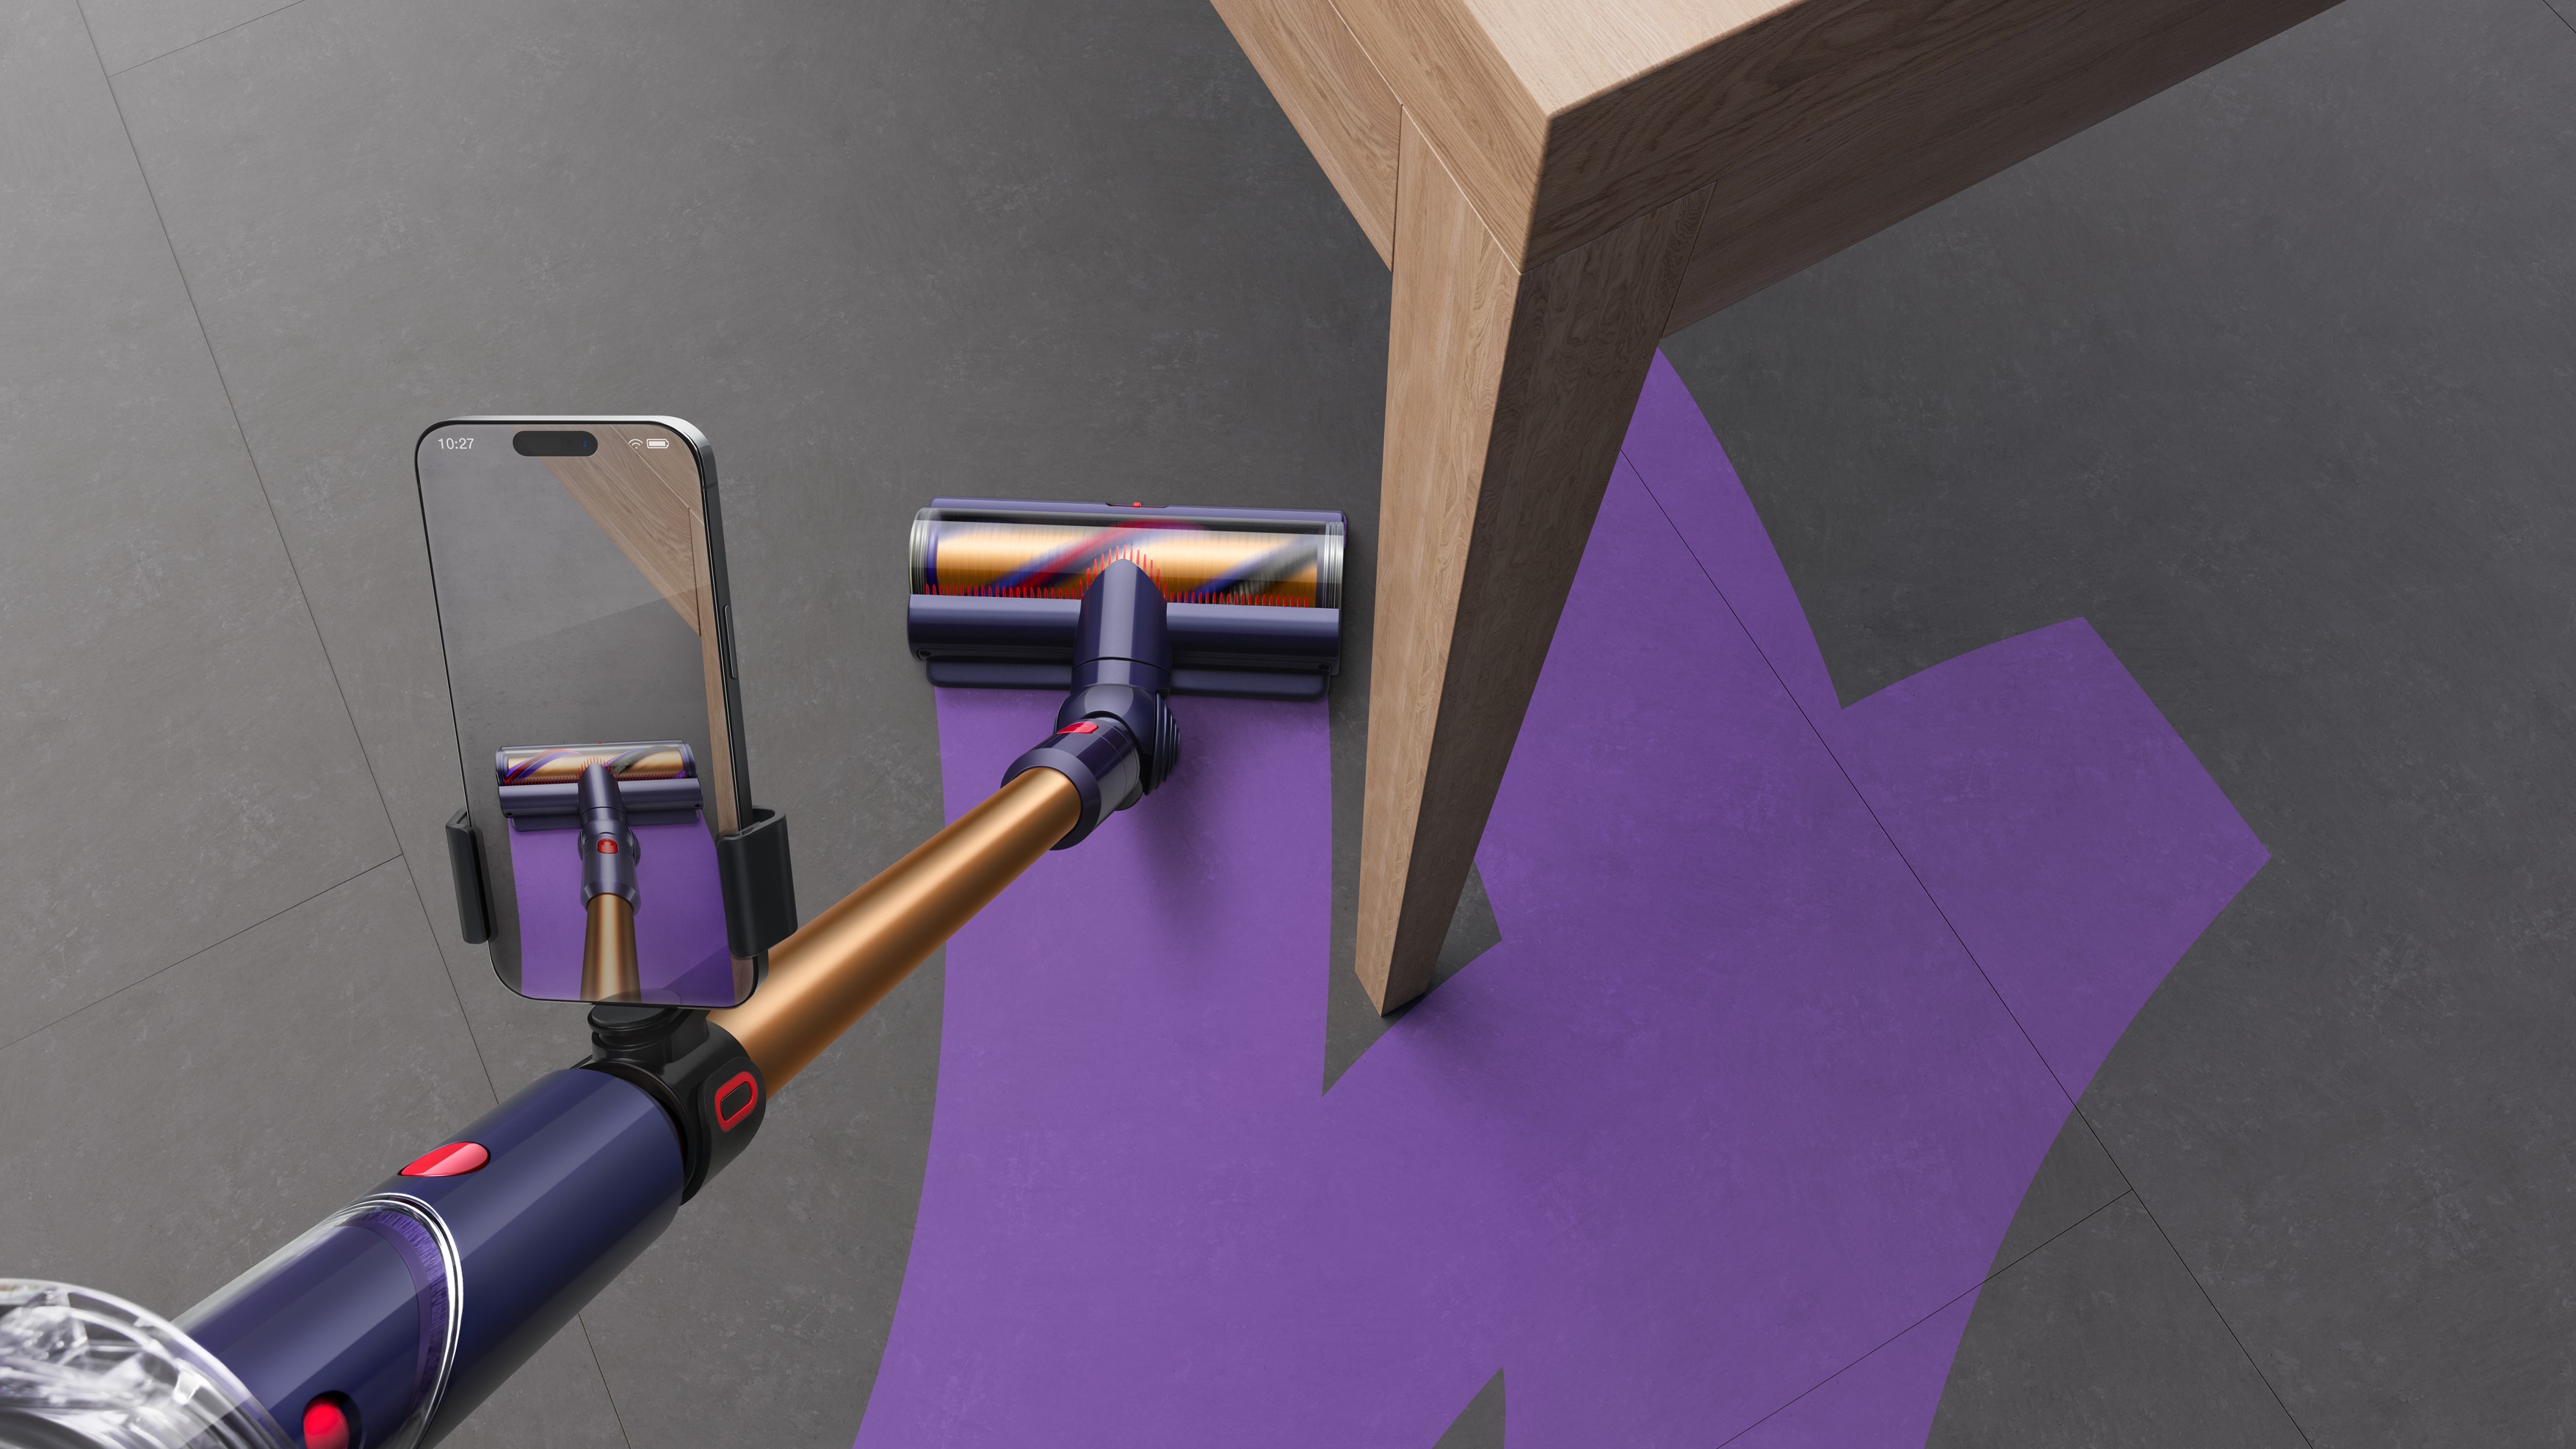 The Dyson CleanTrace AR tool showing where on the floor has and hasn't already been cleaned by a